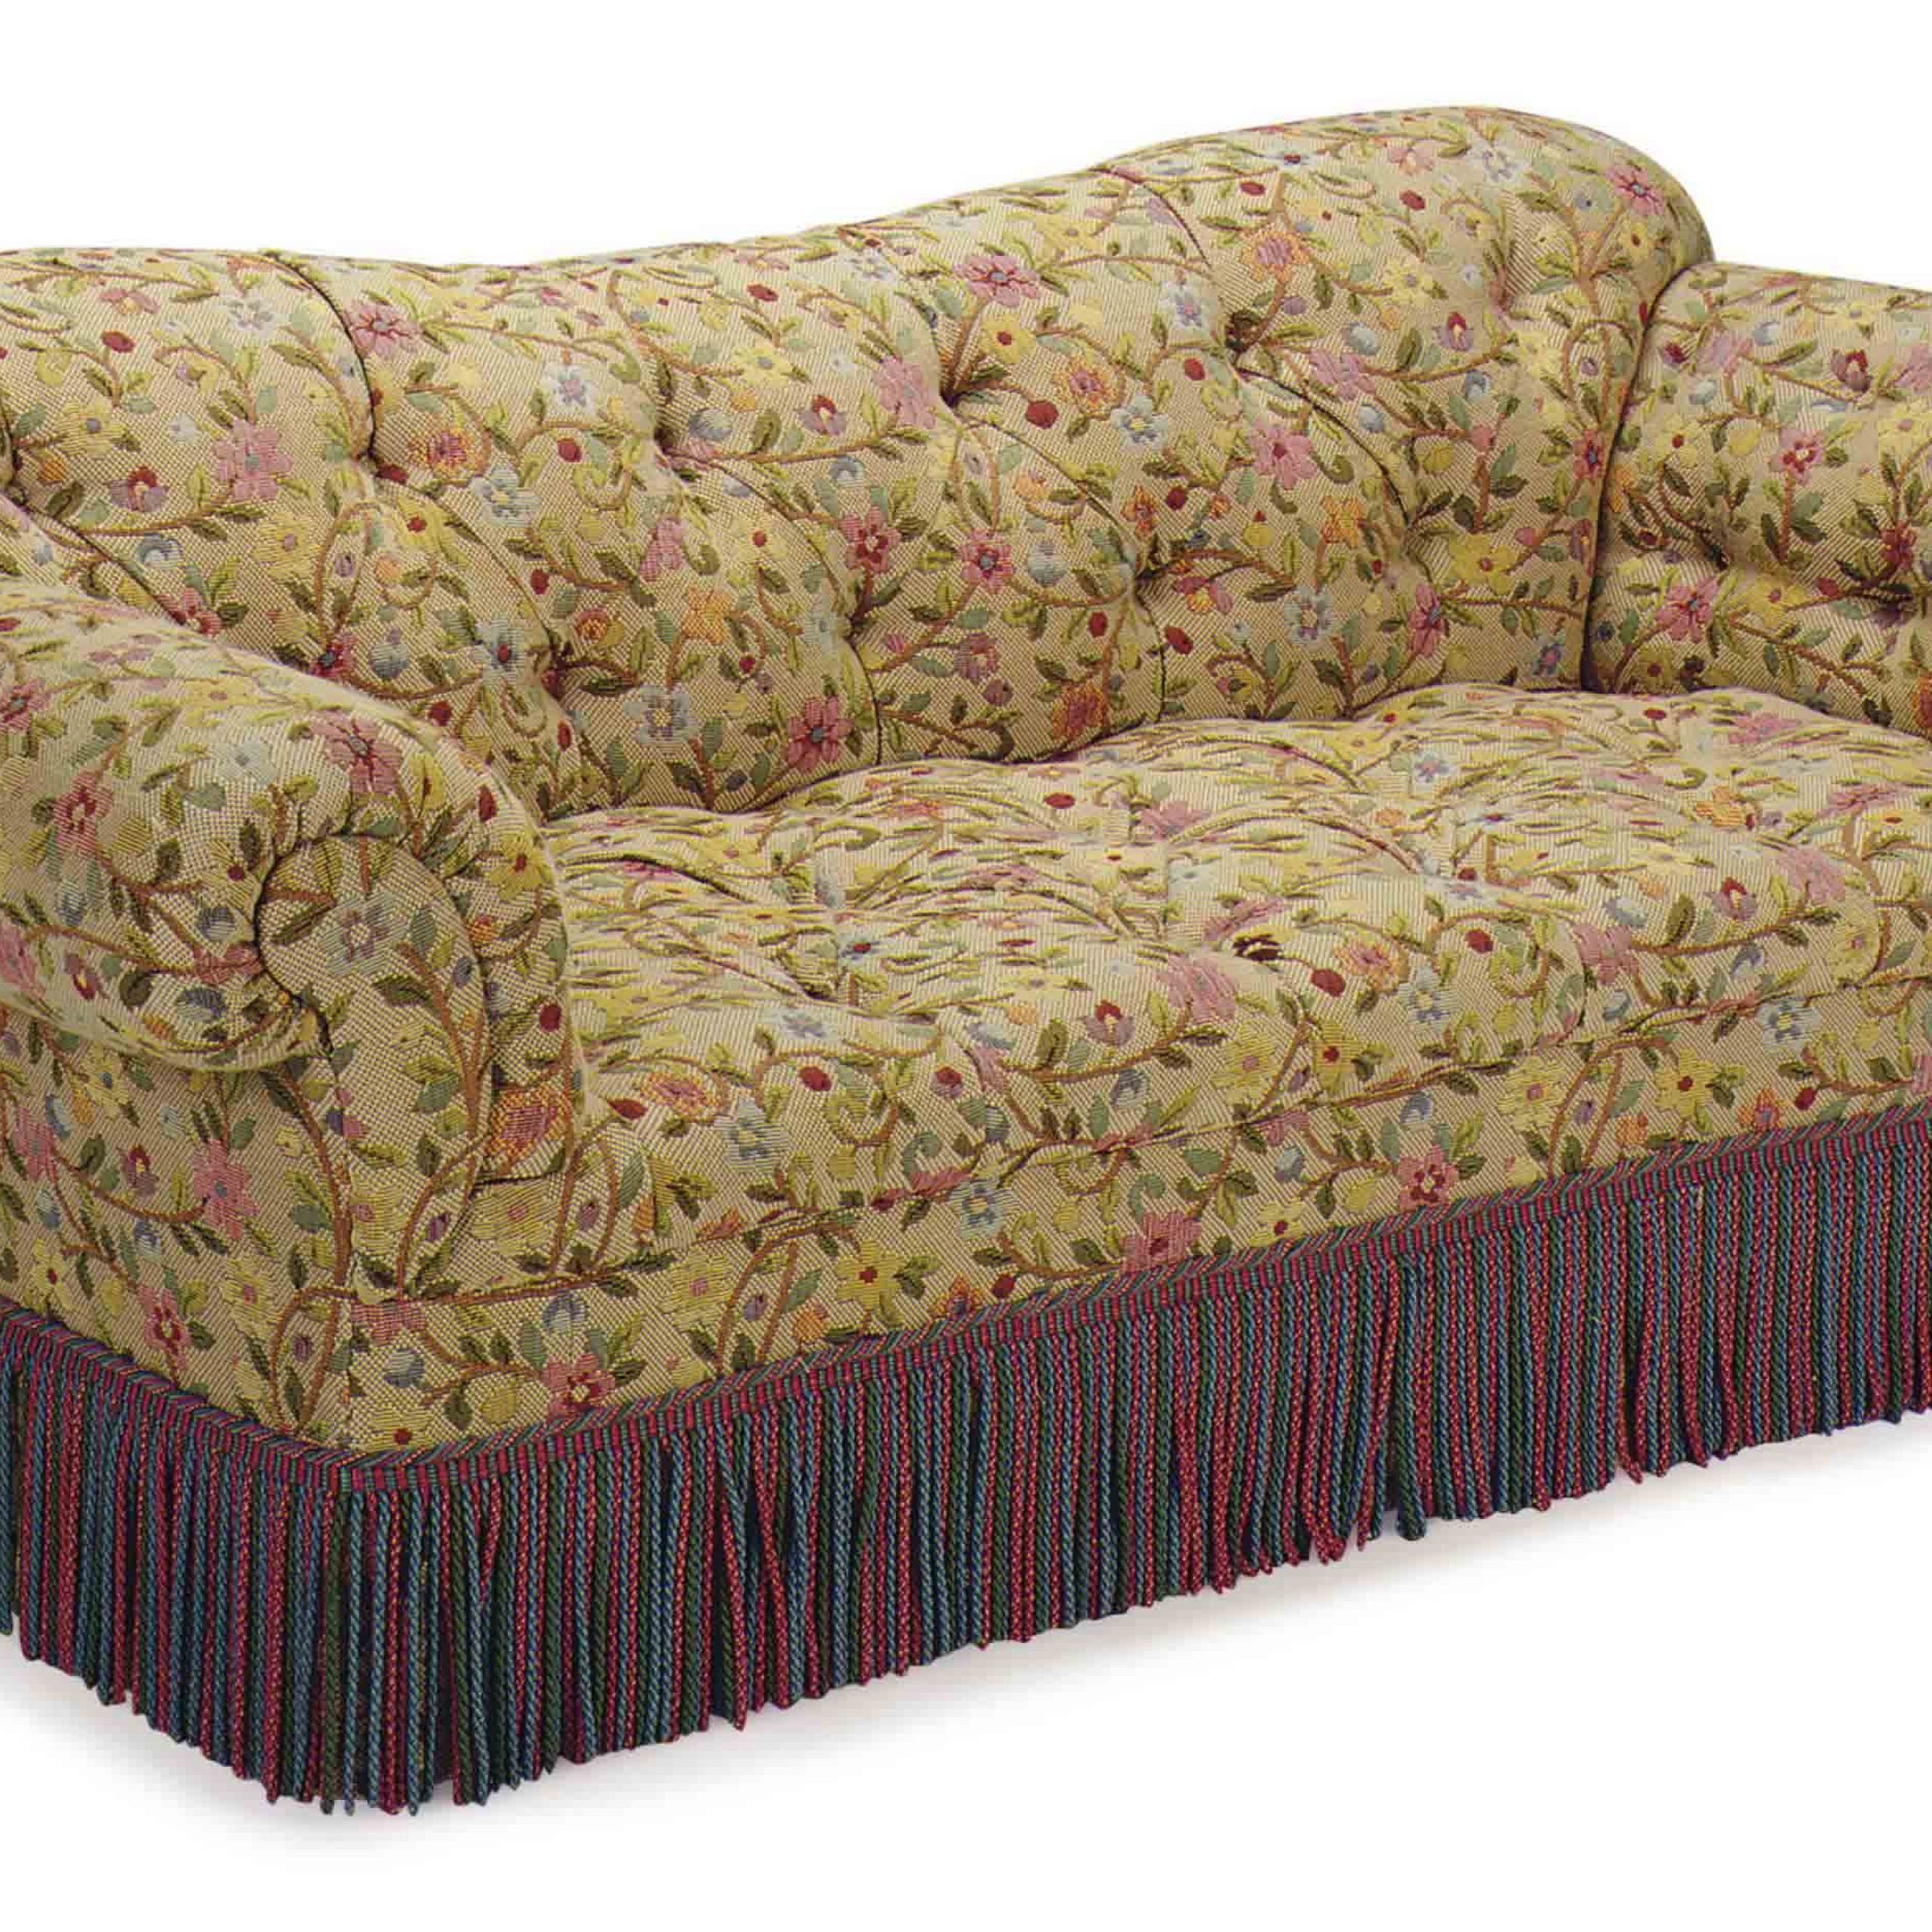 A Button Tufted Floral Pattern Upholstered Sofa, , Late 20th Century Pertaining To Most Current Sofas In Pattern (View 11 of 15)